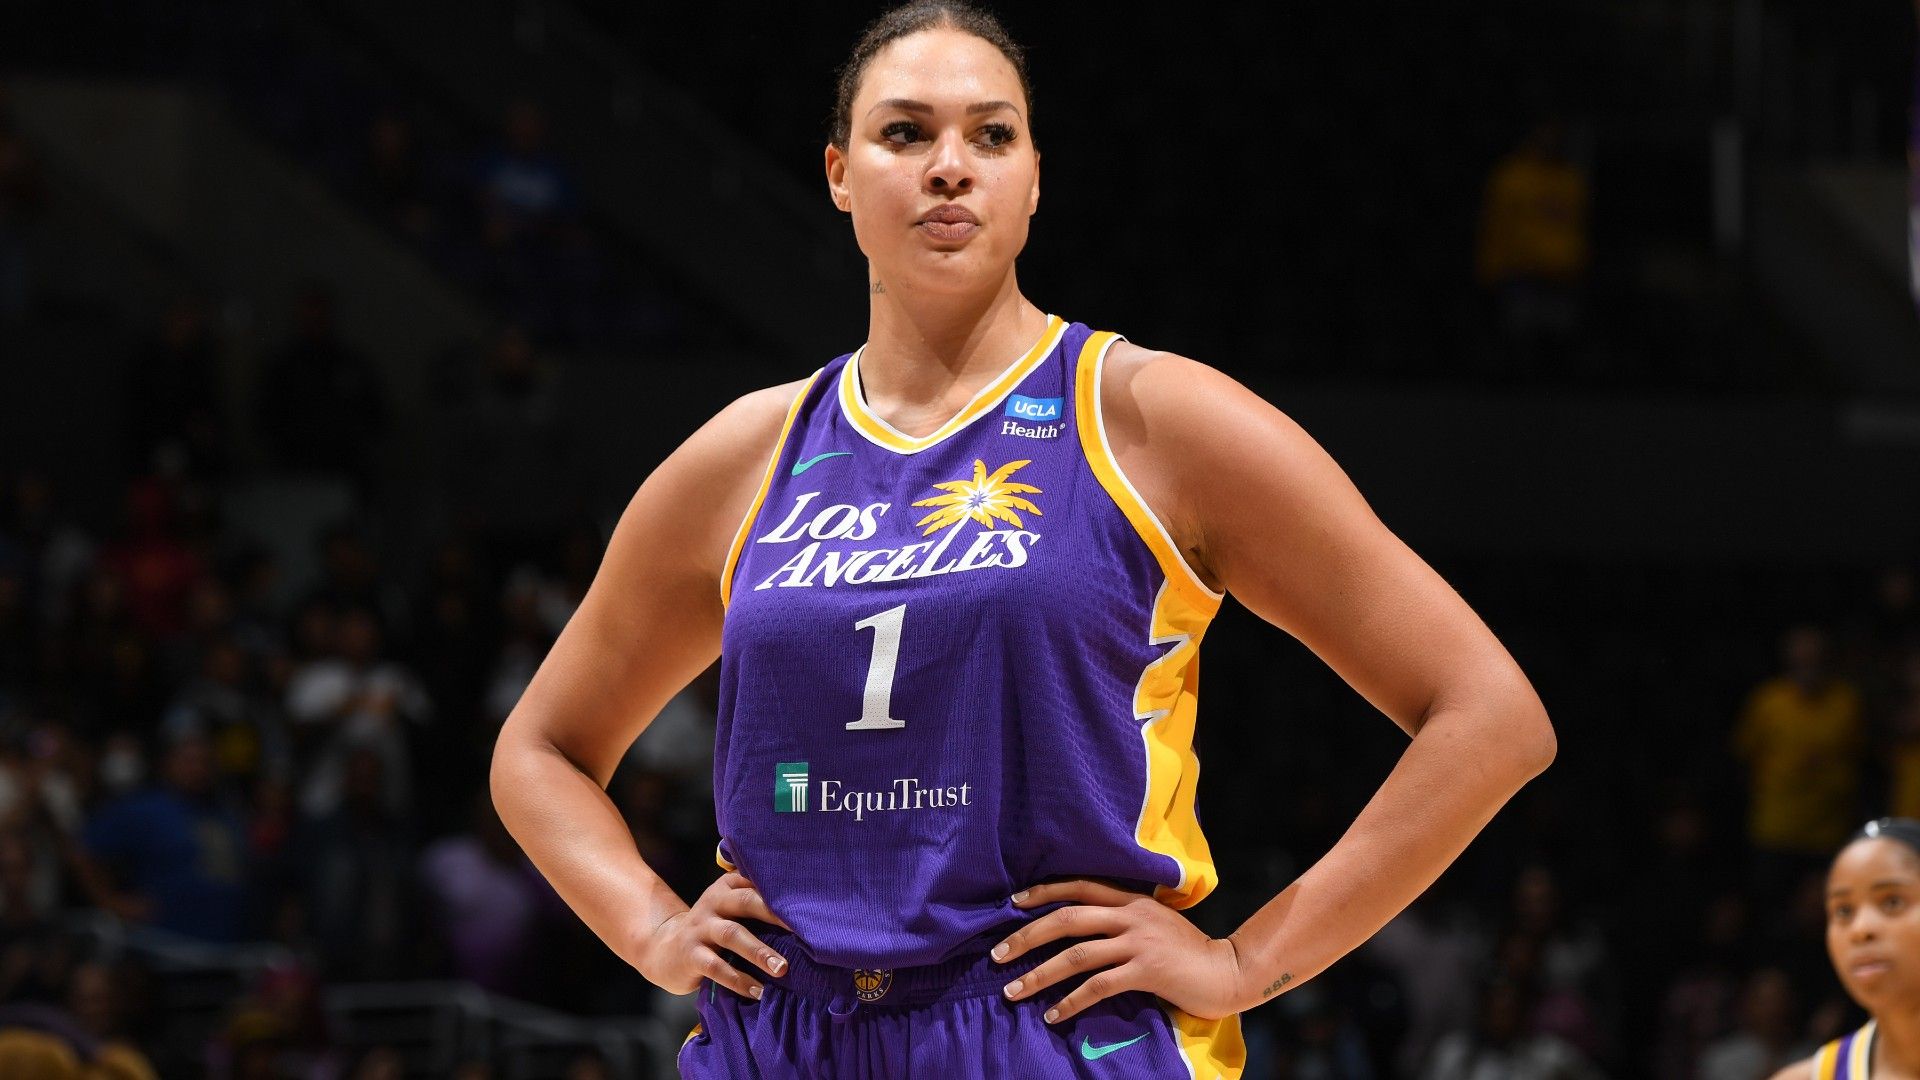 Liz Cambage teases public response to 'past rumours' as she steps away from WNBA following ugly split